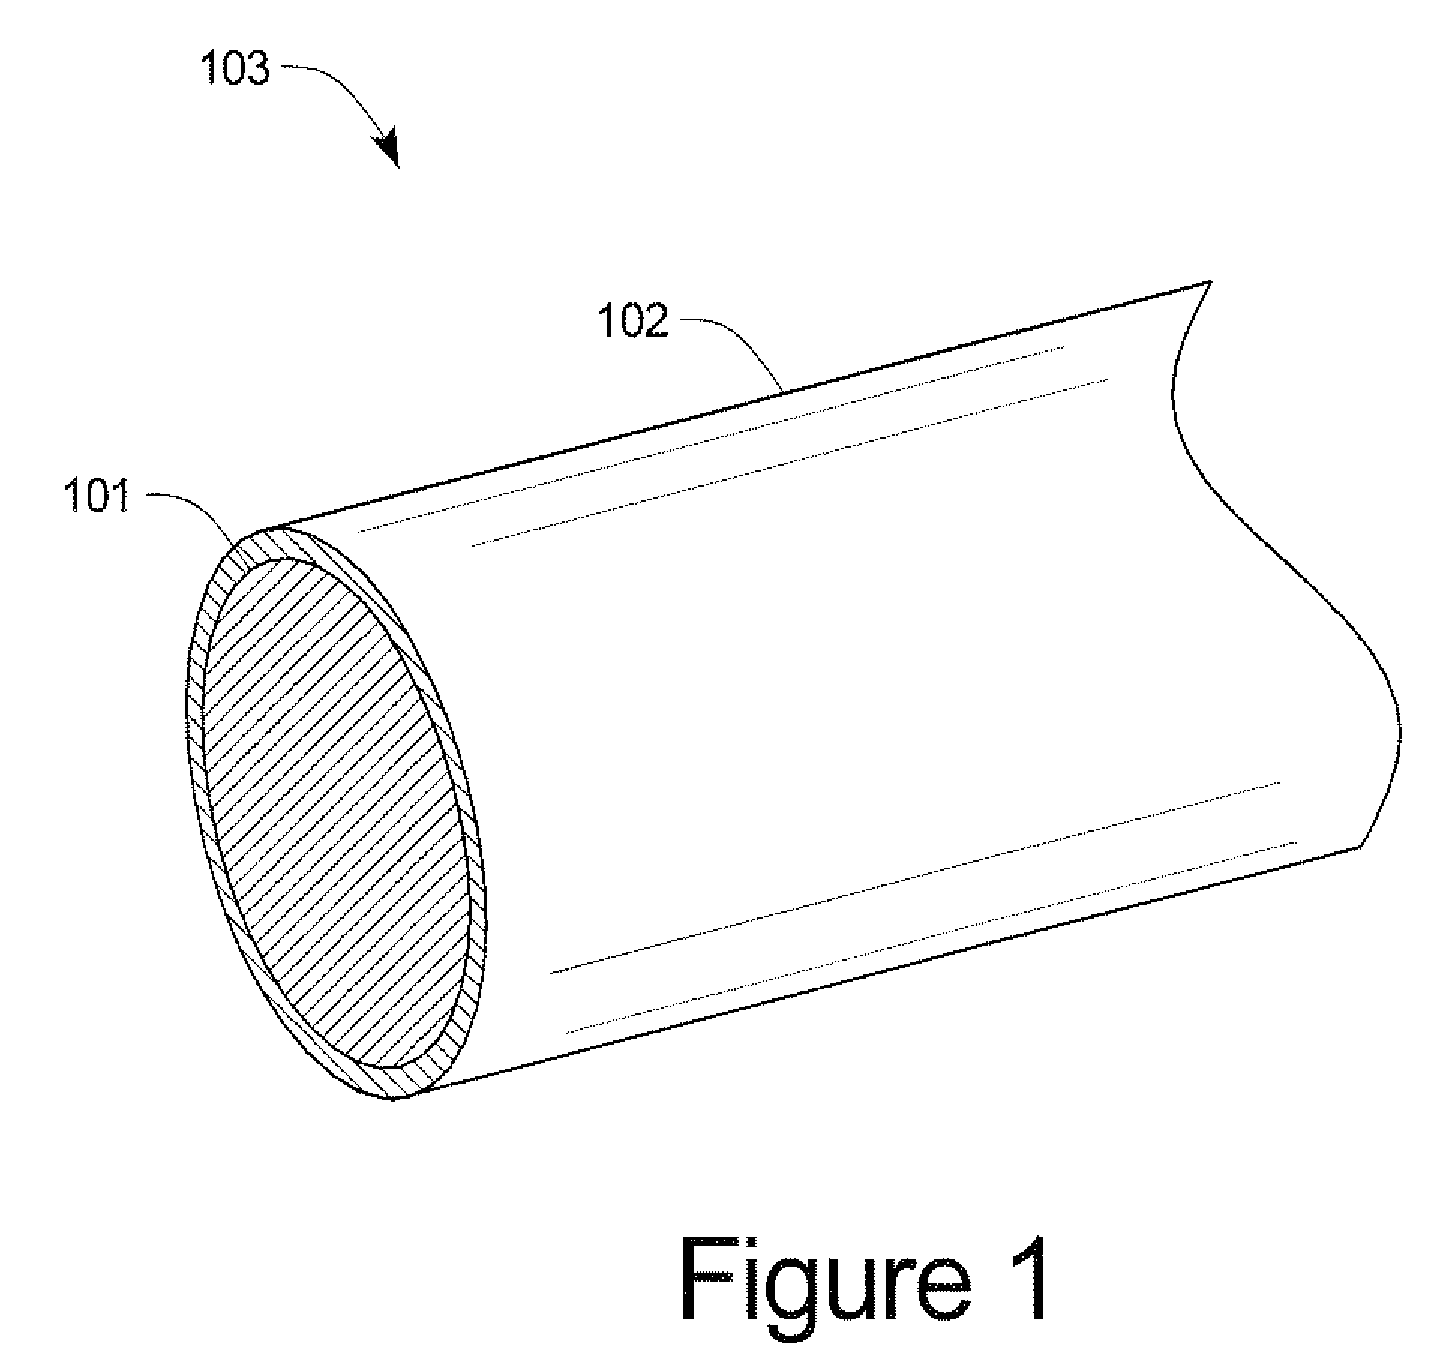 Semiconductor devices and electrical parts manufacturing using metal coated wires